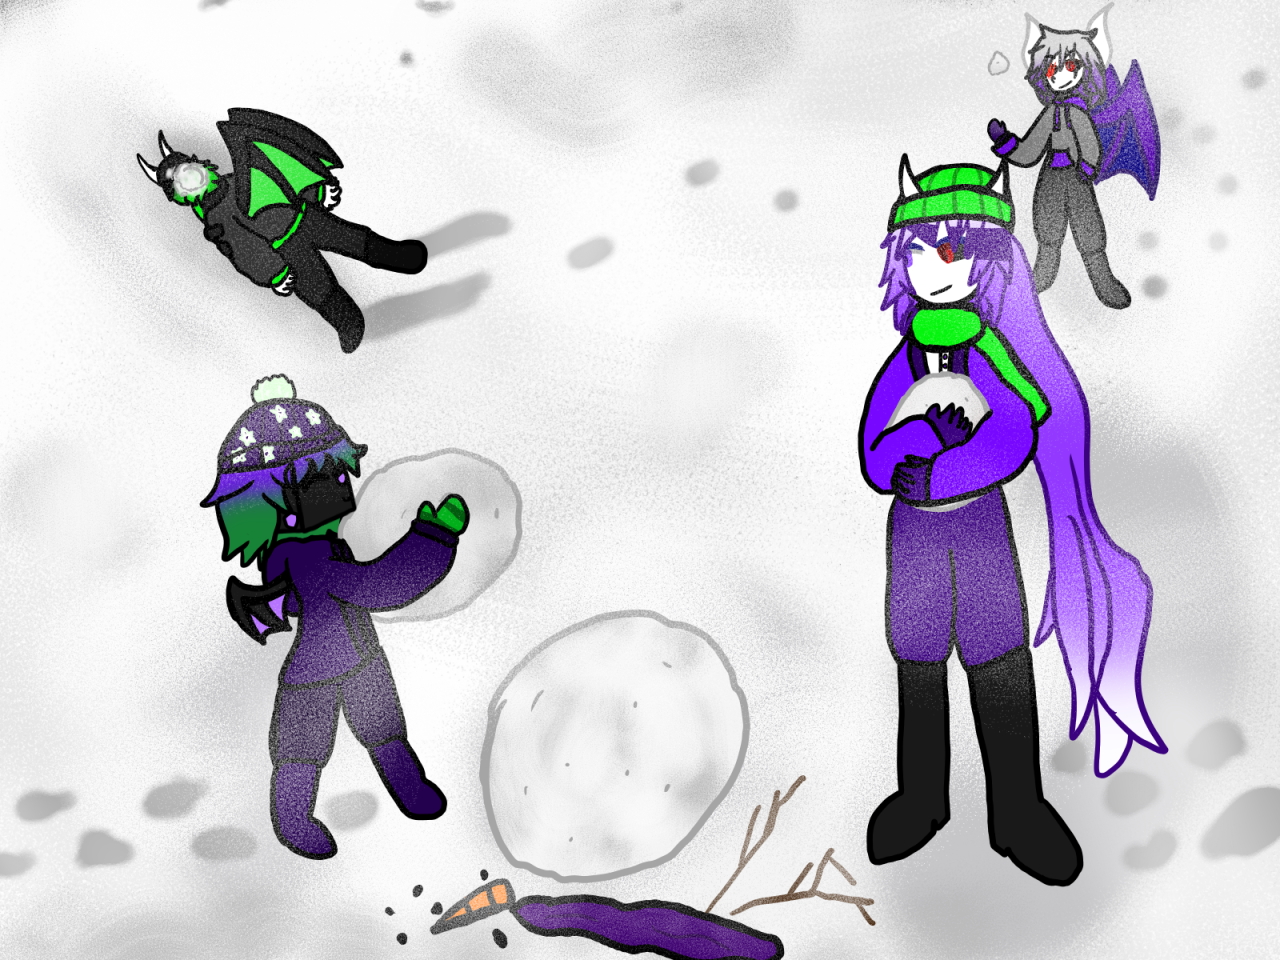 theres snow out so i decided to draw dev lily die and huntress out in the snow #Die#Lily#Dev#Huntress#ship child#devildice shipchild#Cuphead#cuphead ocs